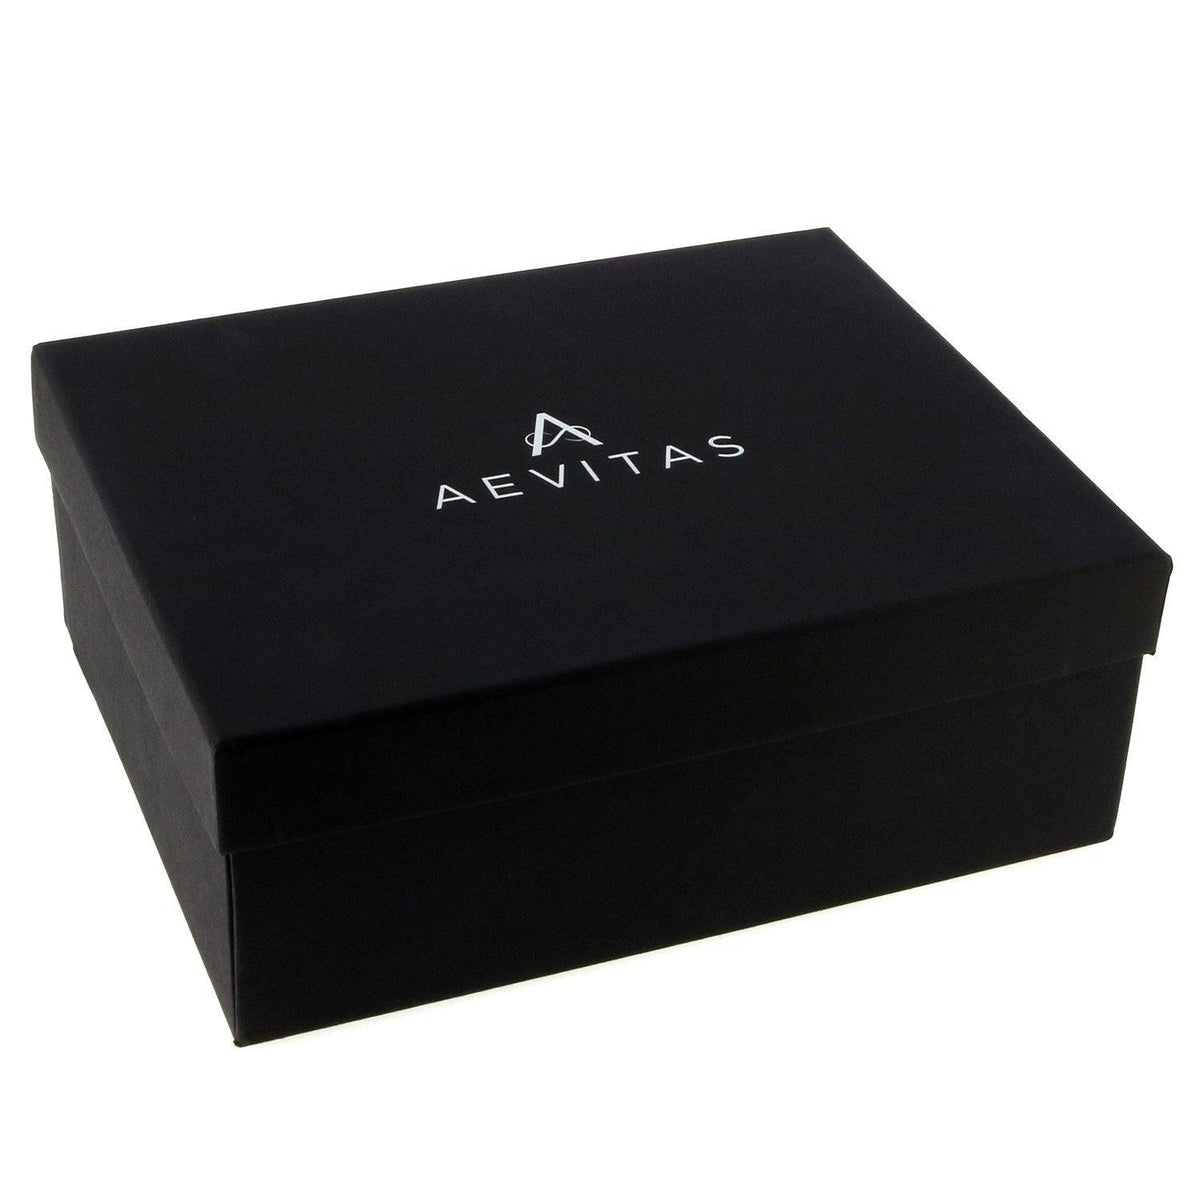 Premium Quality Dark Burl Wood Finish Watch Collectors Box for 6 Watches by Aevitas